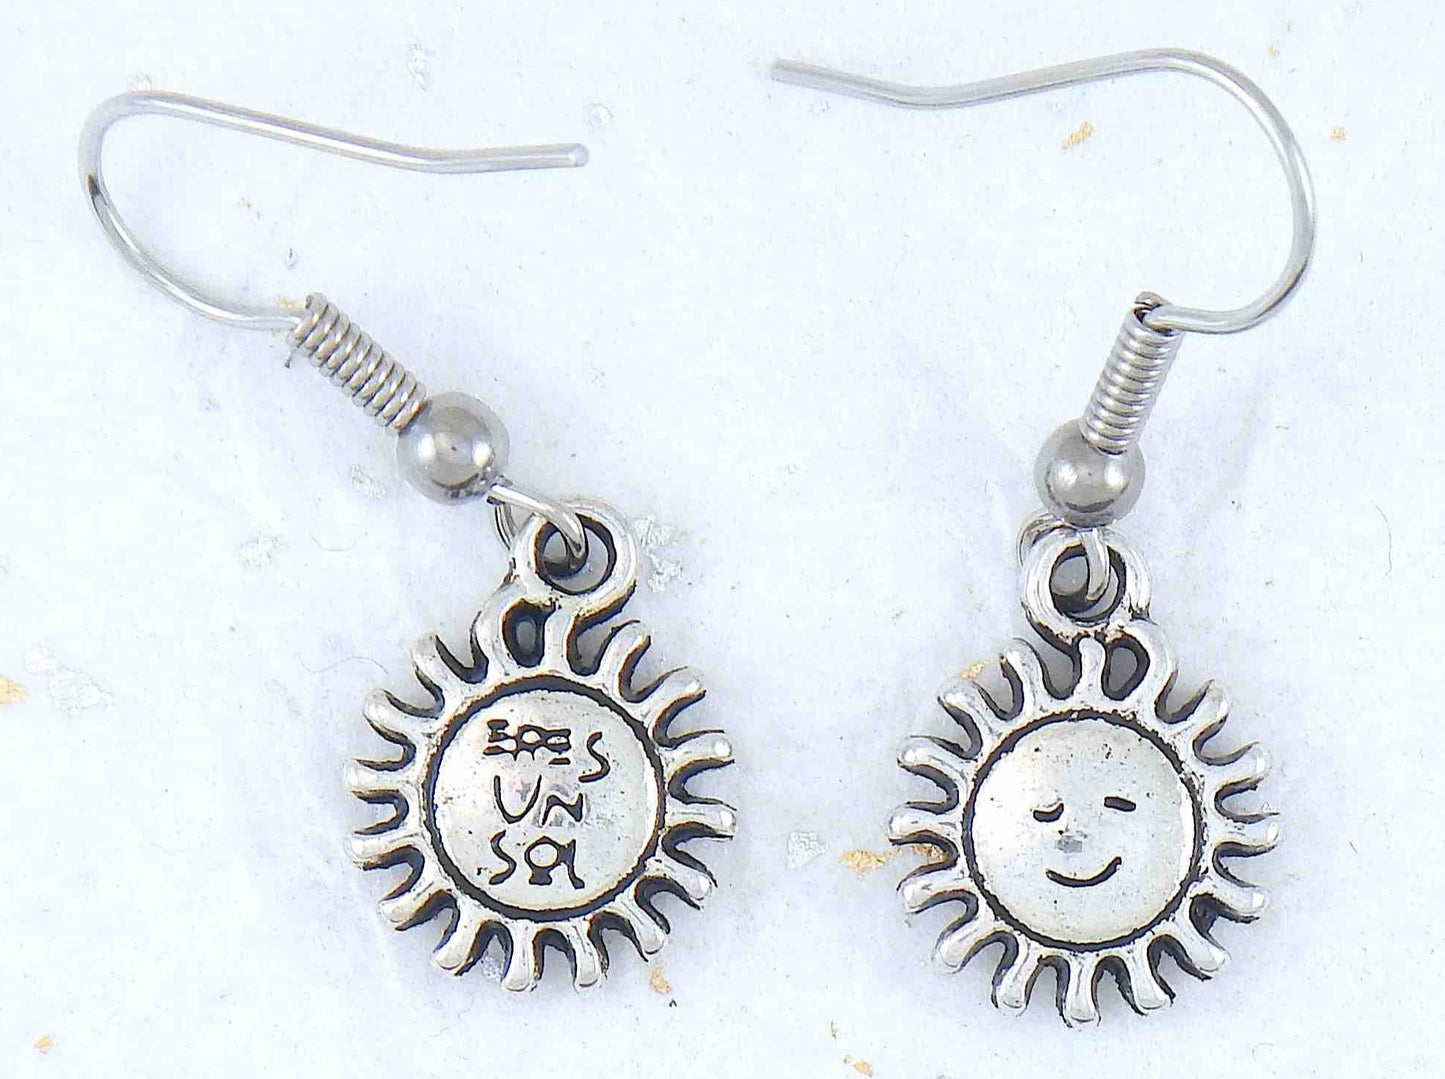 Short earrings with pewter smiling suns, stainless steel hooks